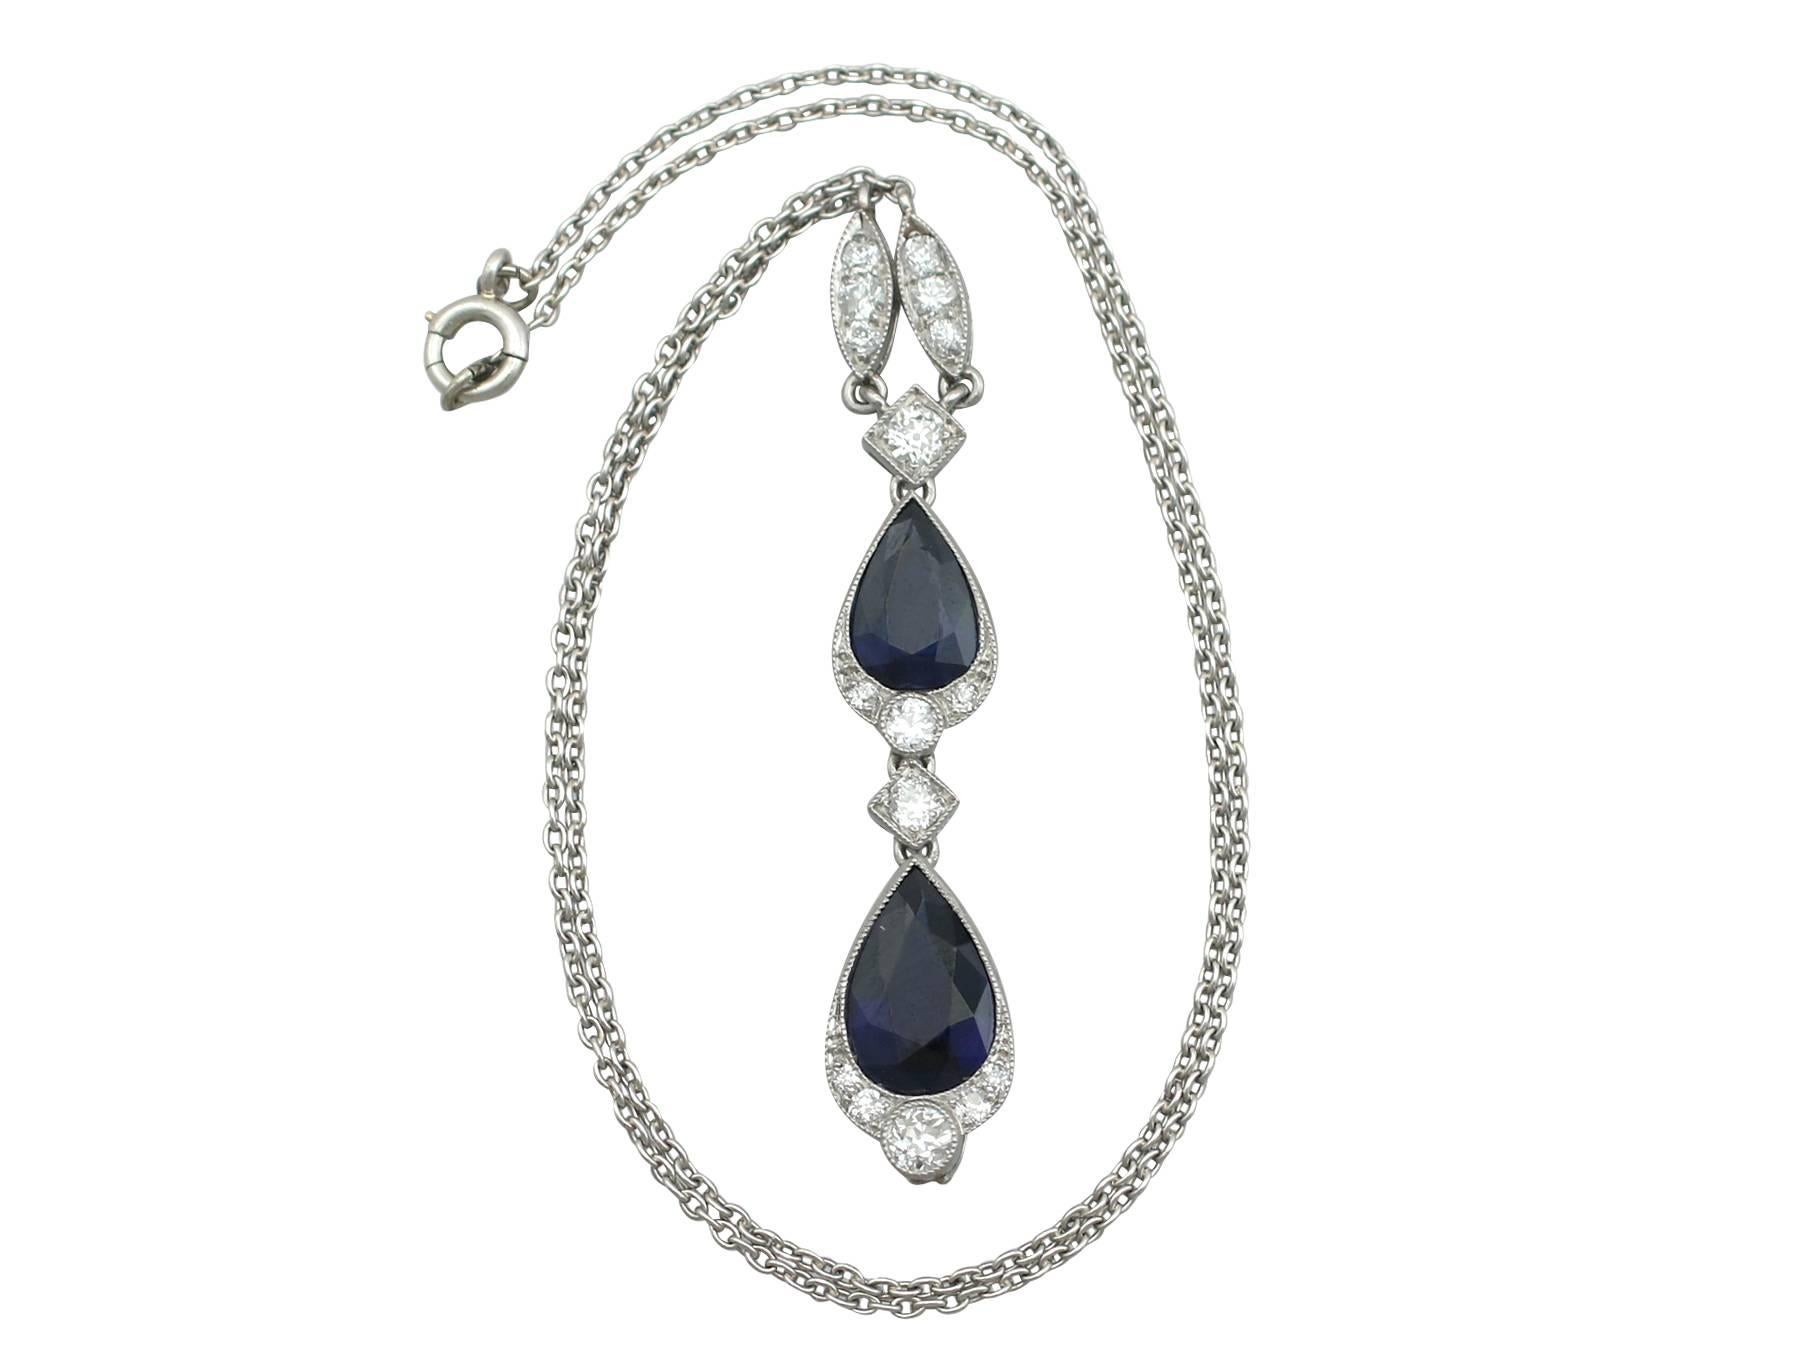 A stunning antique 4.85 Carat sapphire and 0.66 Carat diamond, platinum teardrop necklace; part of our diverse antique jewelry and estate jewelry collections.

This stunning, fine and impressive sapphire tear drop necklace has been crafted in